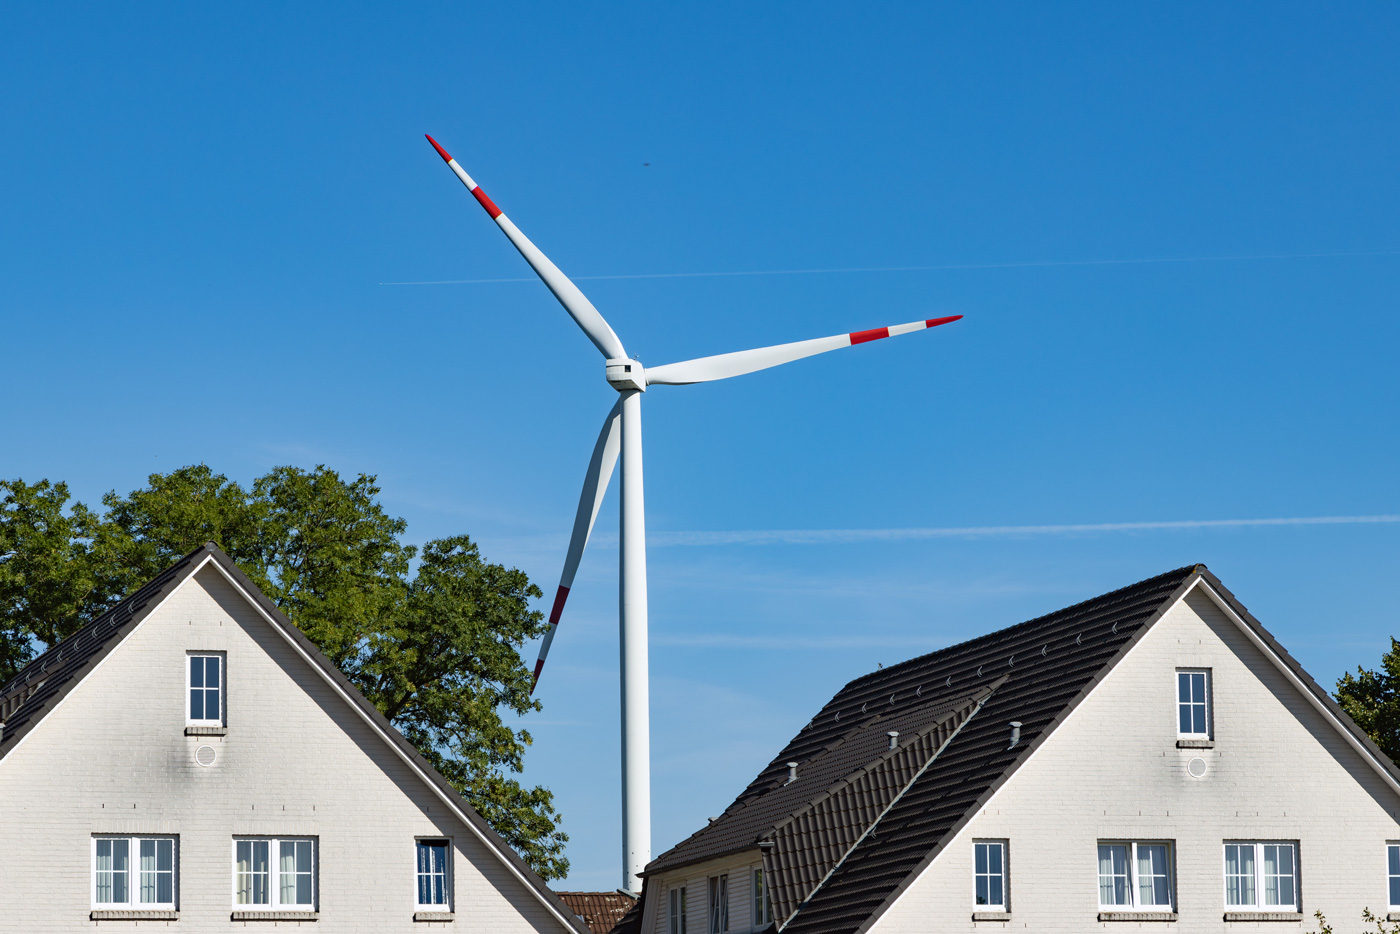 A photo of a wind turbine in between the roofs of two homes.